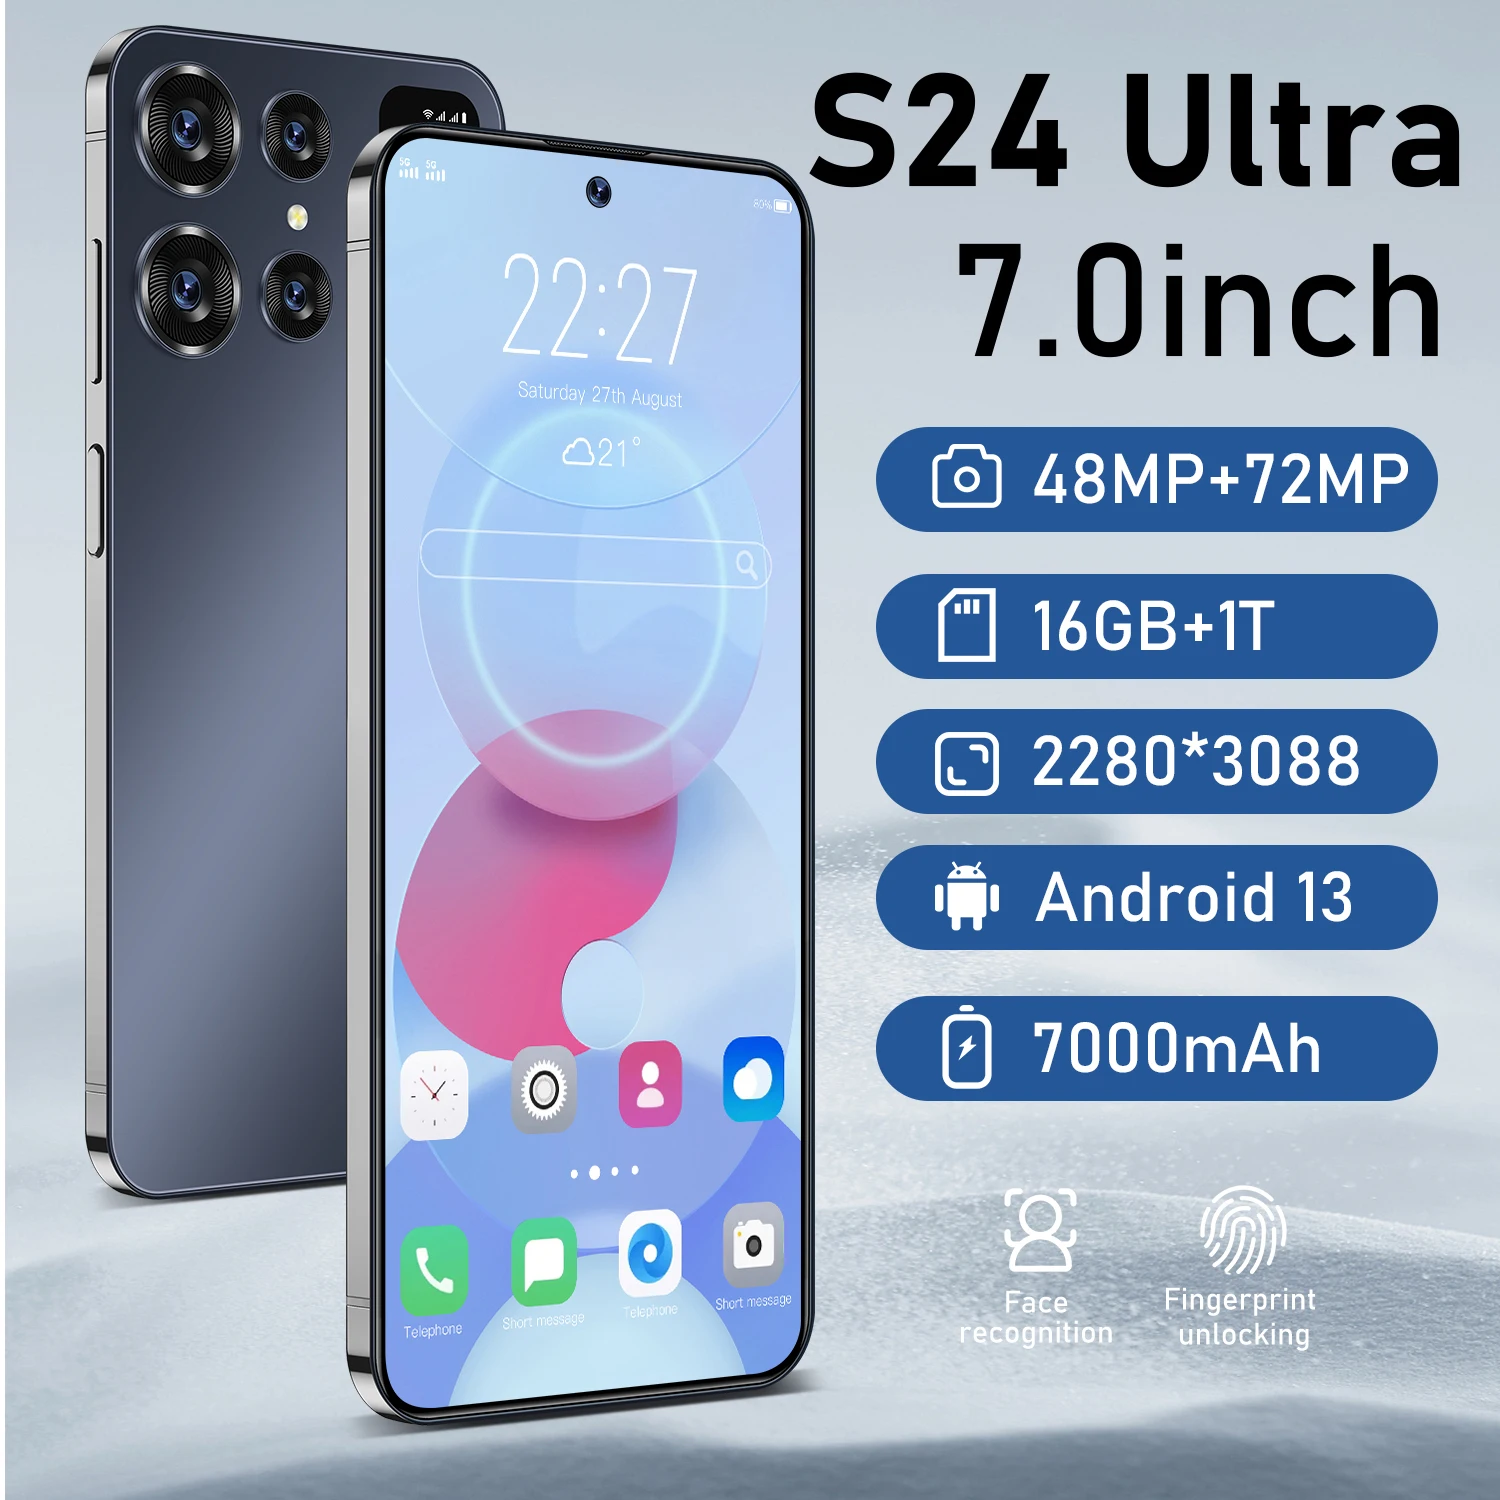 

New Original S24 Ultra 7.0 Inch HD Screen Smartphone Face Unlock 16GB+1TB Celulares 5G Dual Sim Android13 7000mAh 72MP with NFC